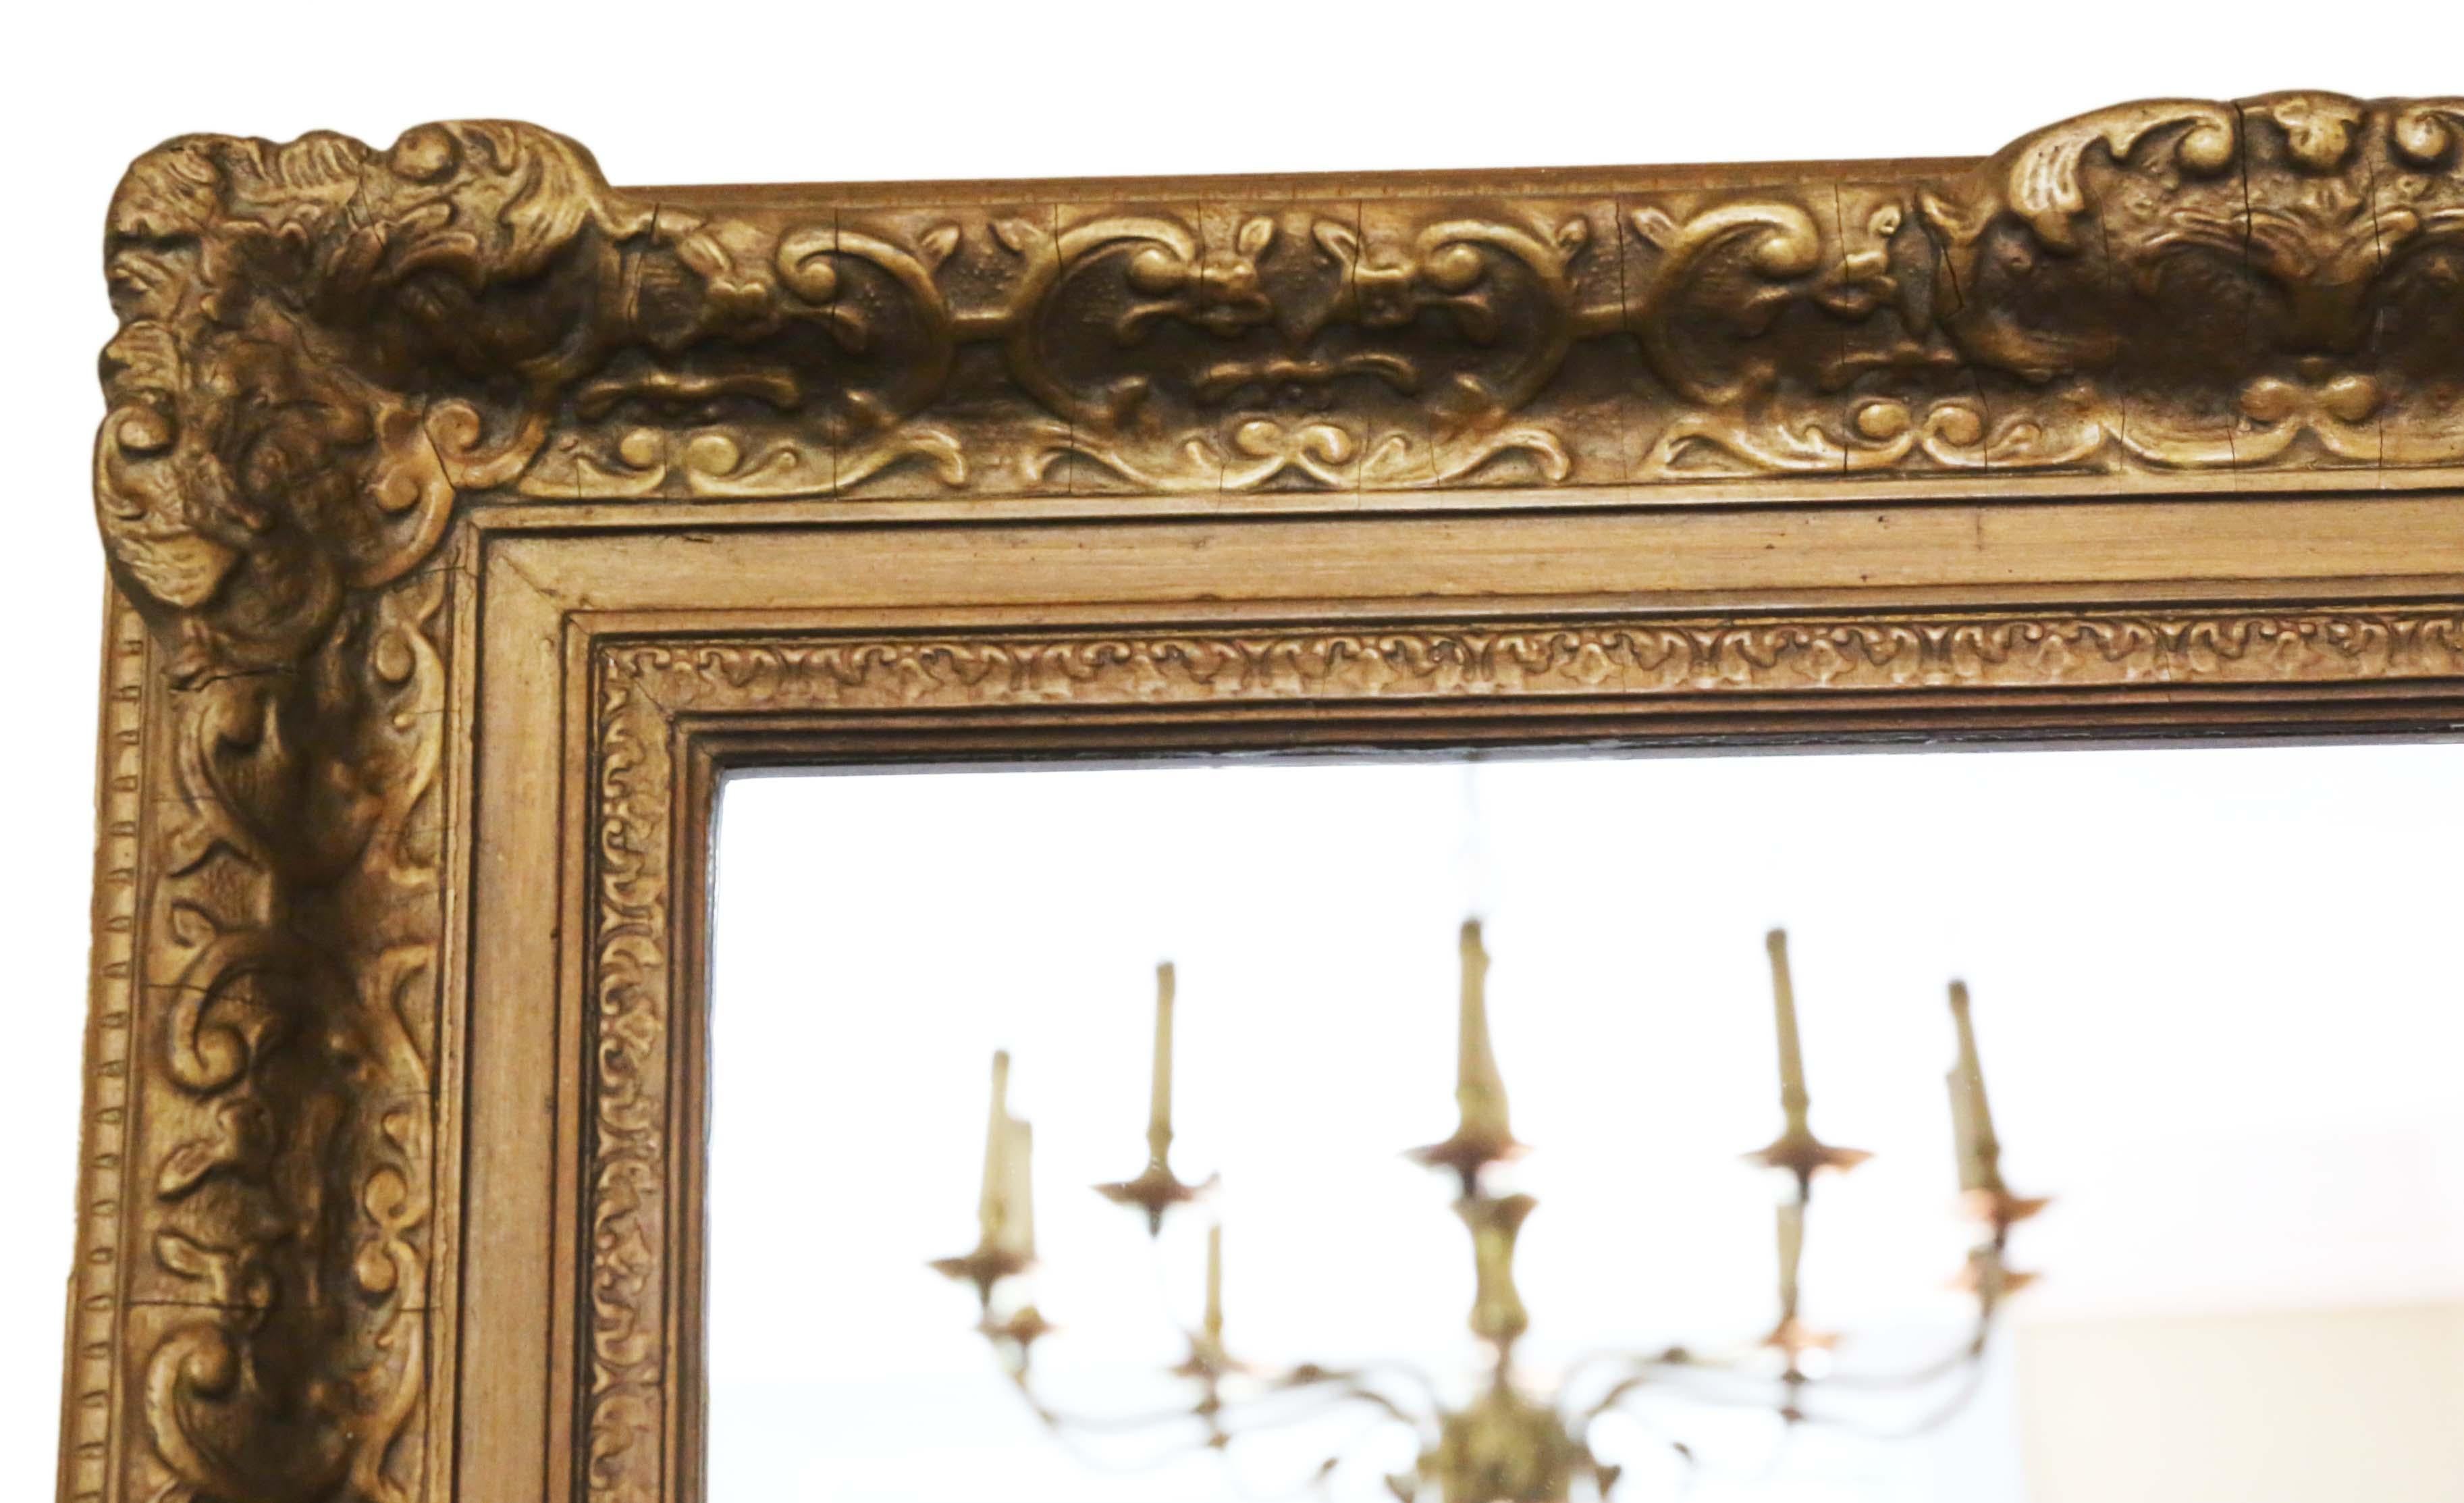 Antique large quality 19th century gilt overmantle or wall mirror. A great look.
A charming mirror, that is full of age and character. Lovely frame with some losses touching up, refinishing and repairs over the years. No loose joints and no